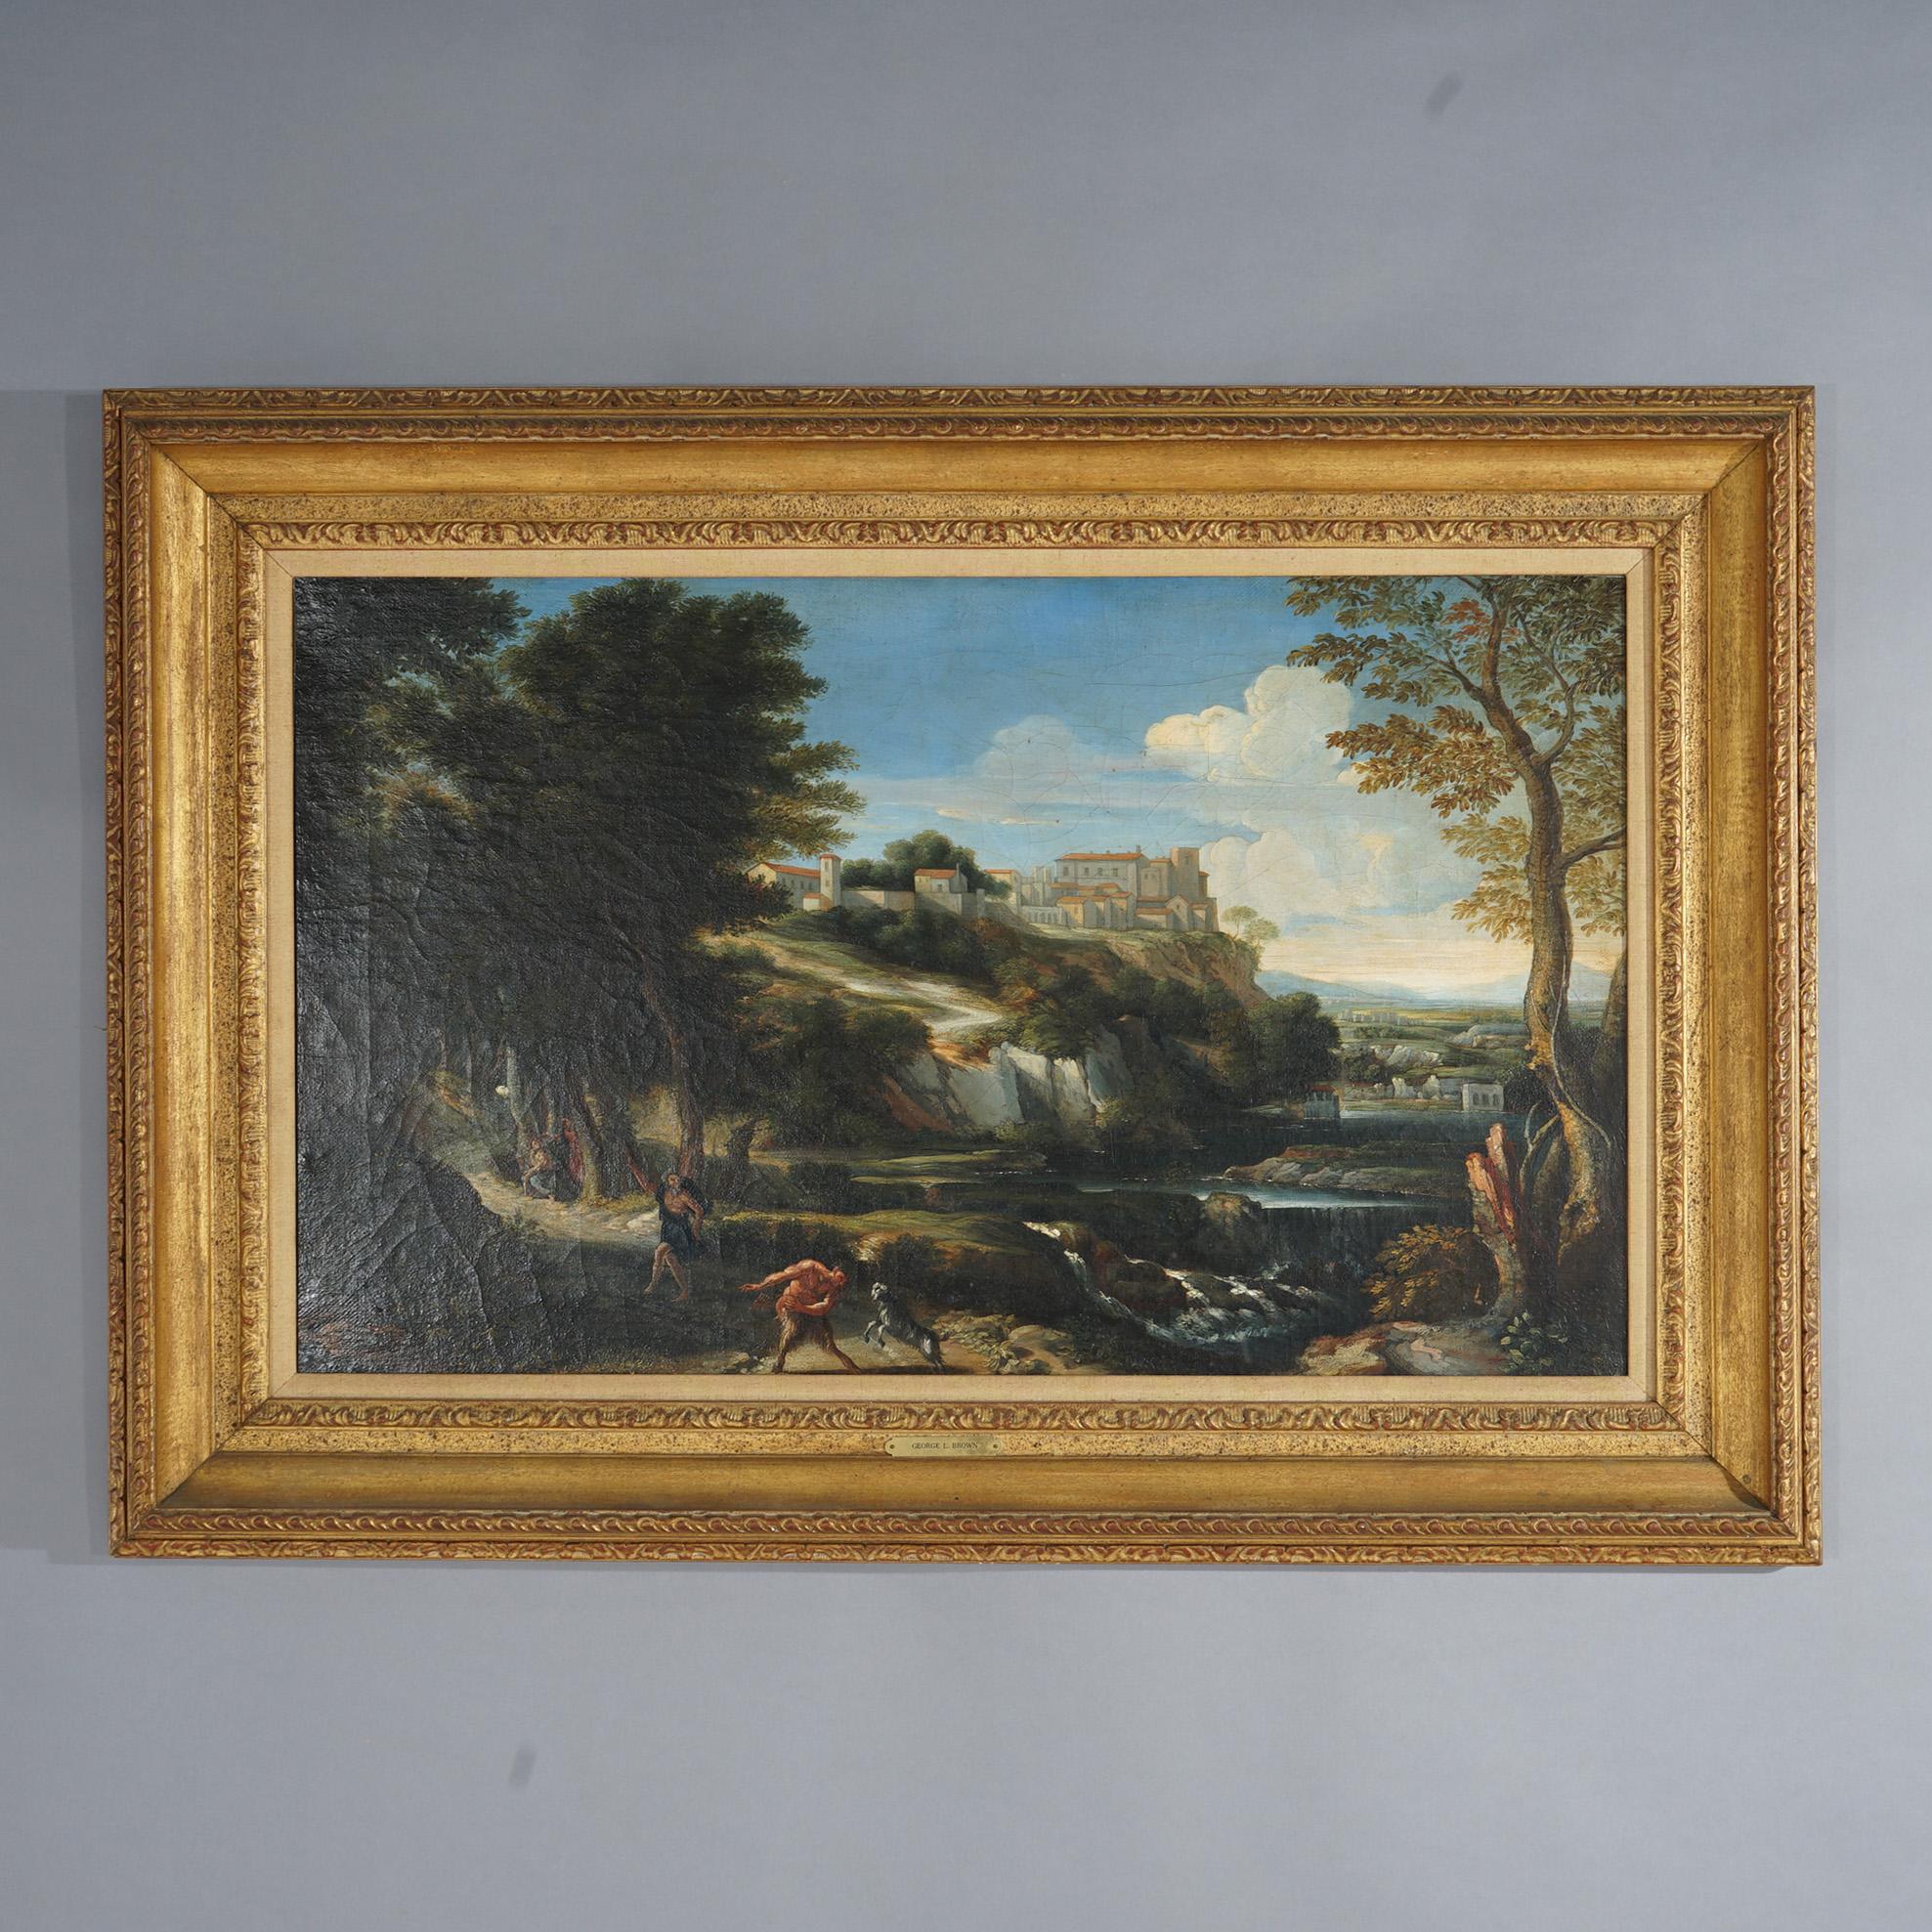 Hand-Painted Antique Painting, Landscape with Figures by George L. Brown, 19th C